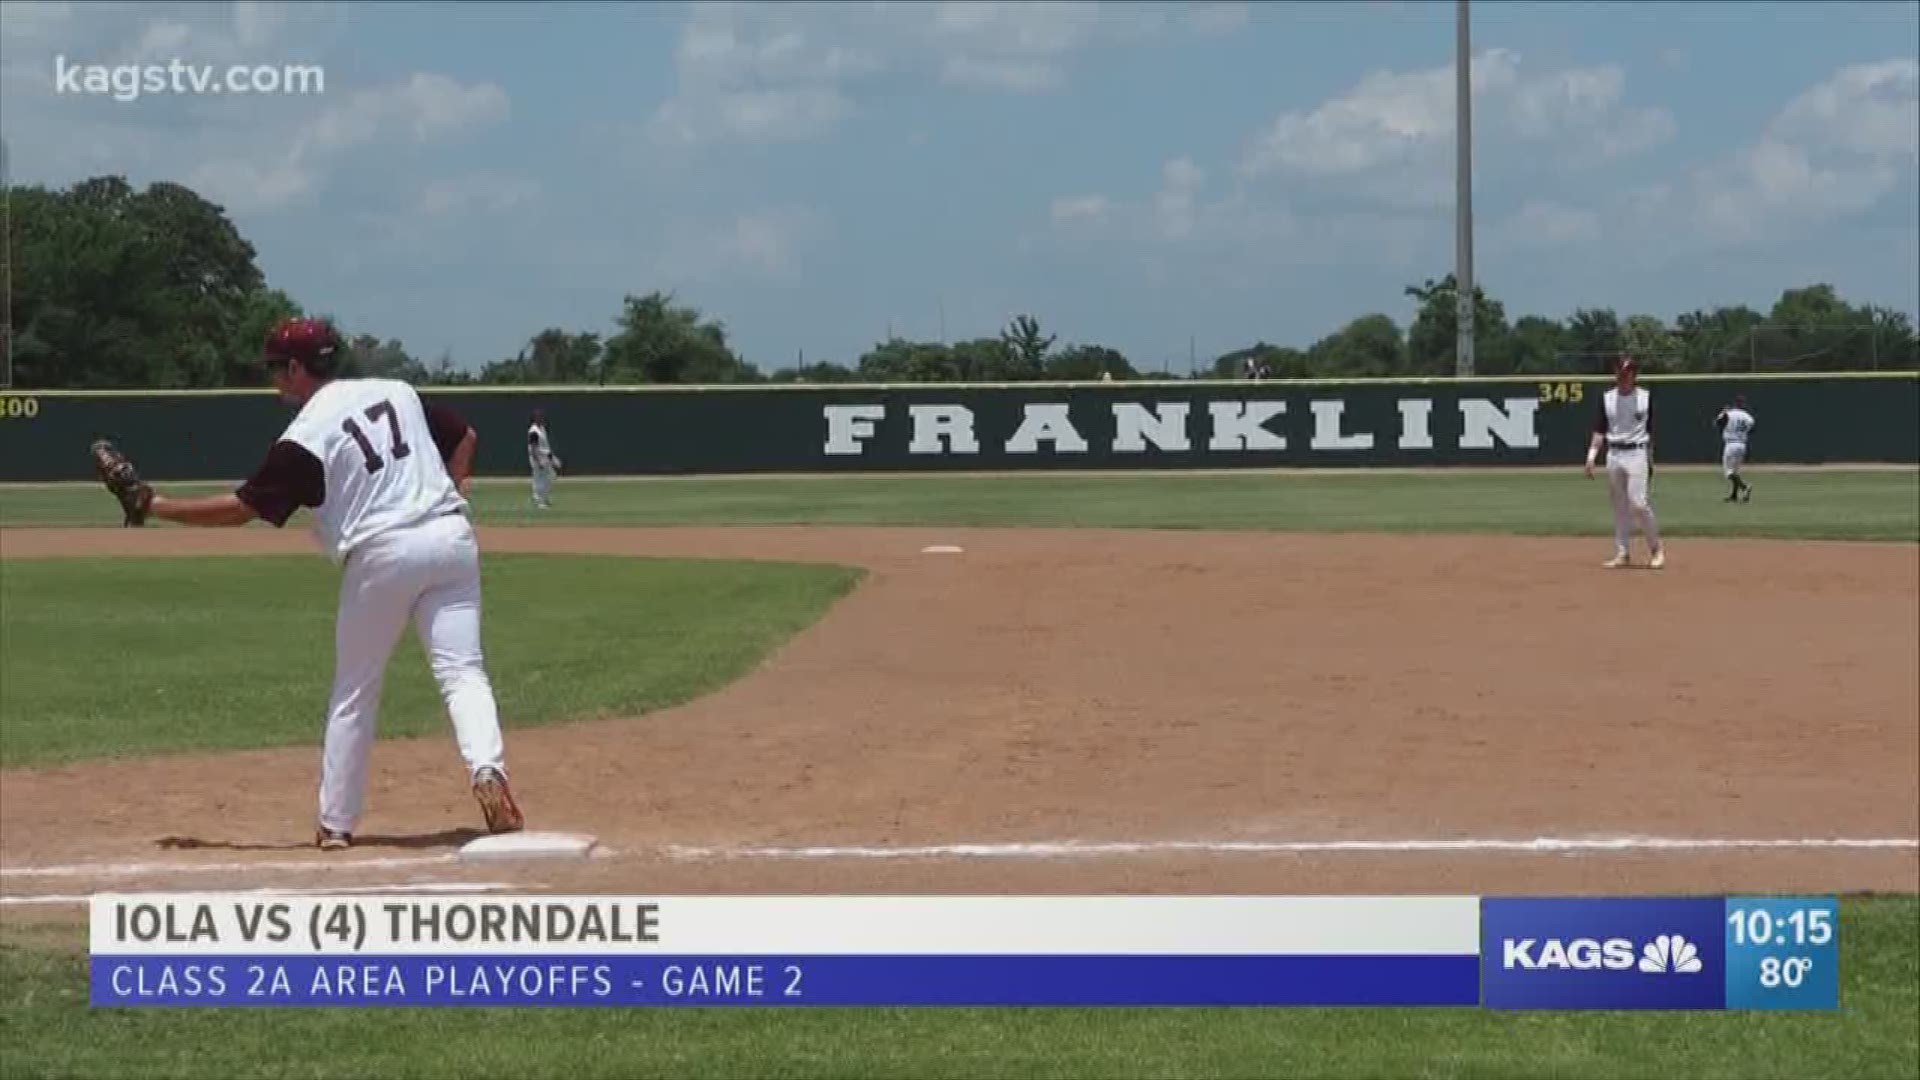 No. 4 Thorndale defeated Iola 4-2 to advance to the Class 2A Regional Quarterfinals.